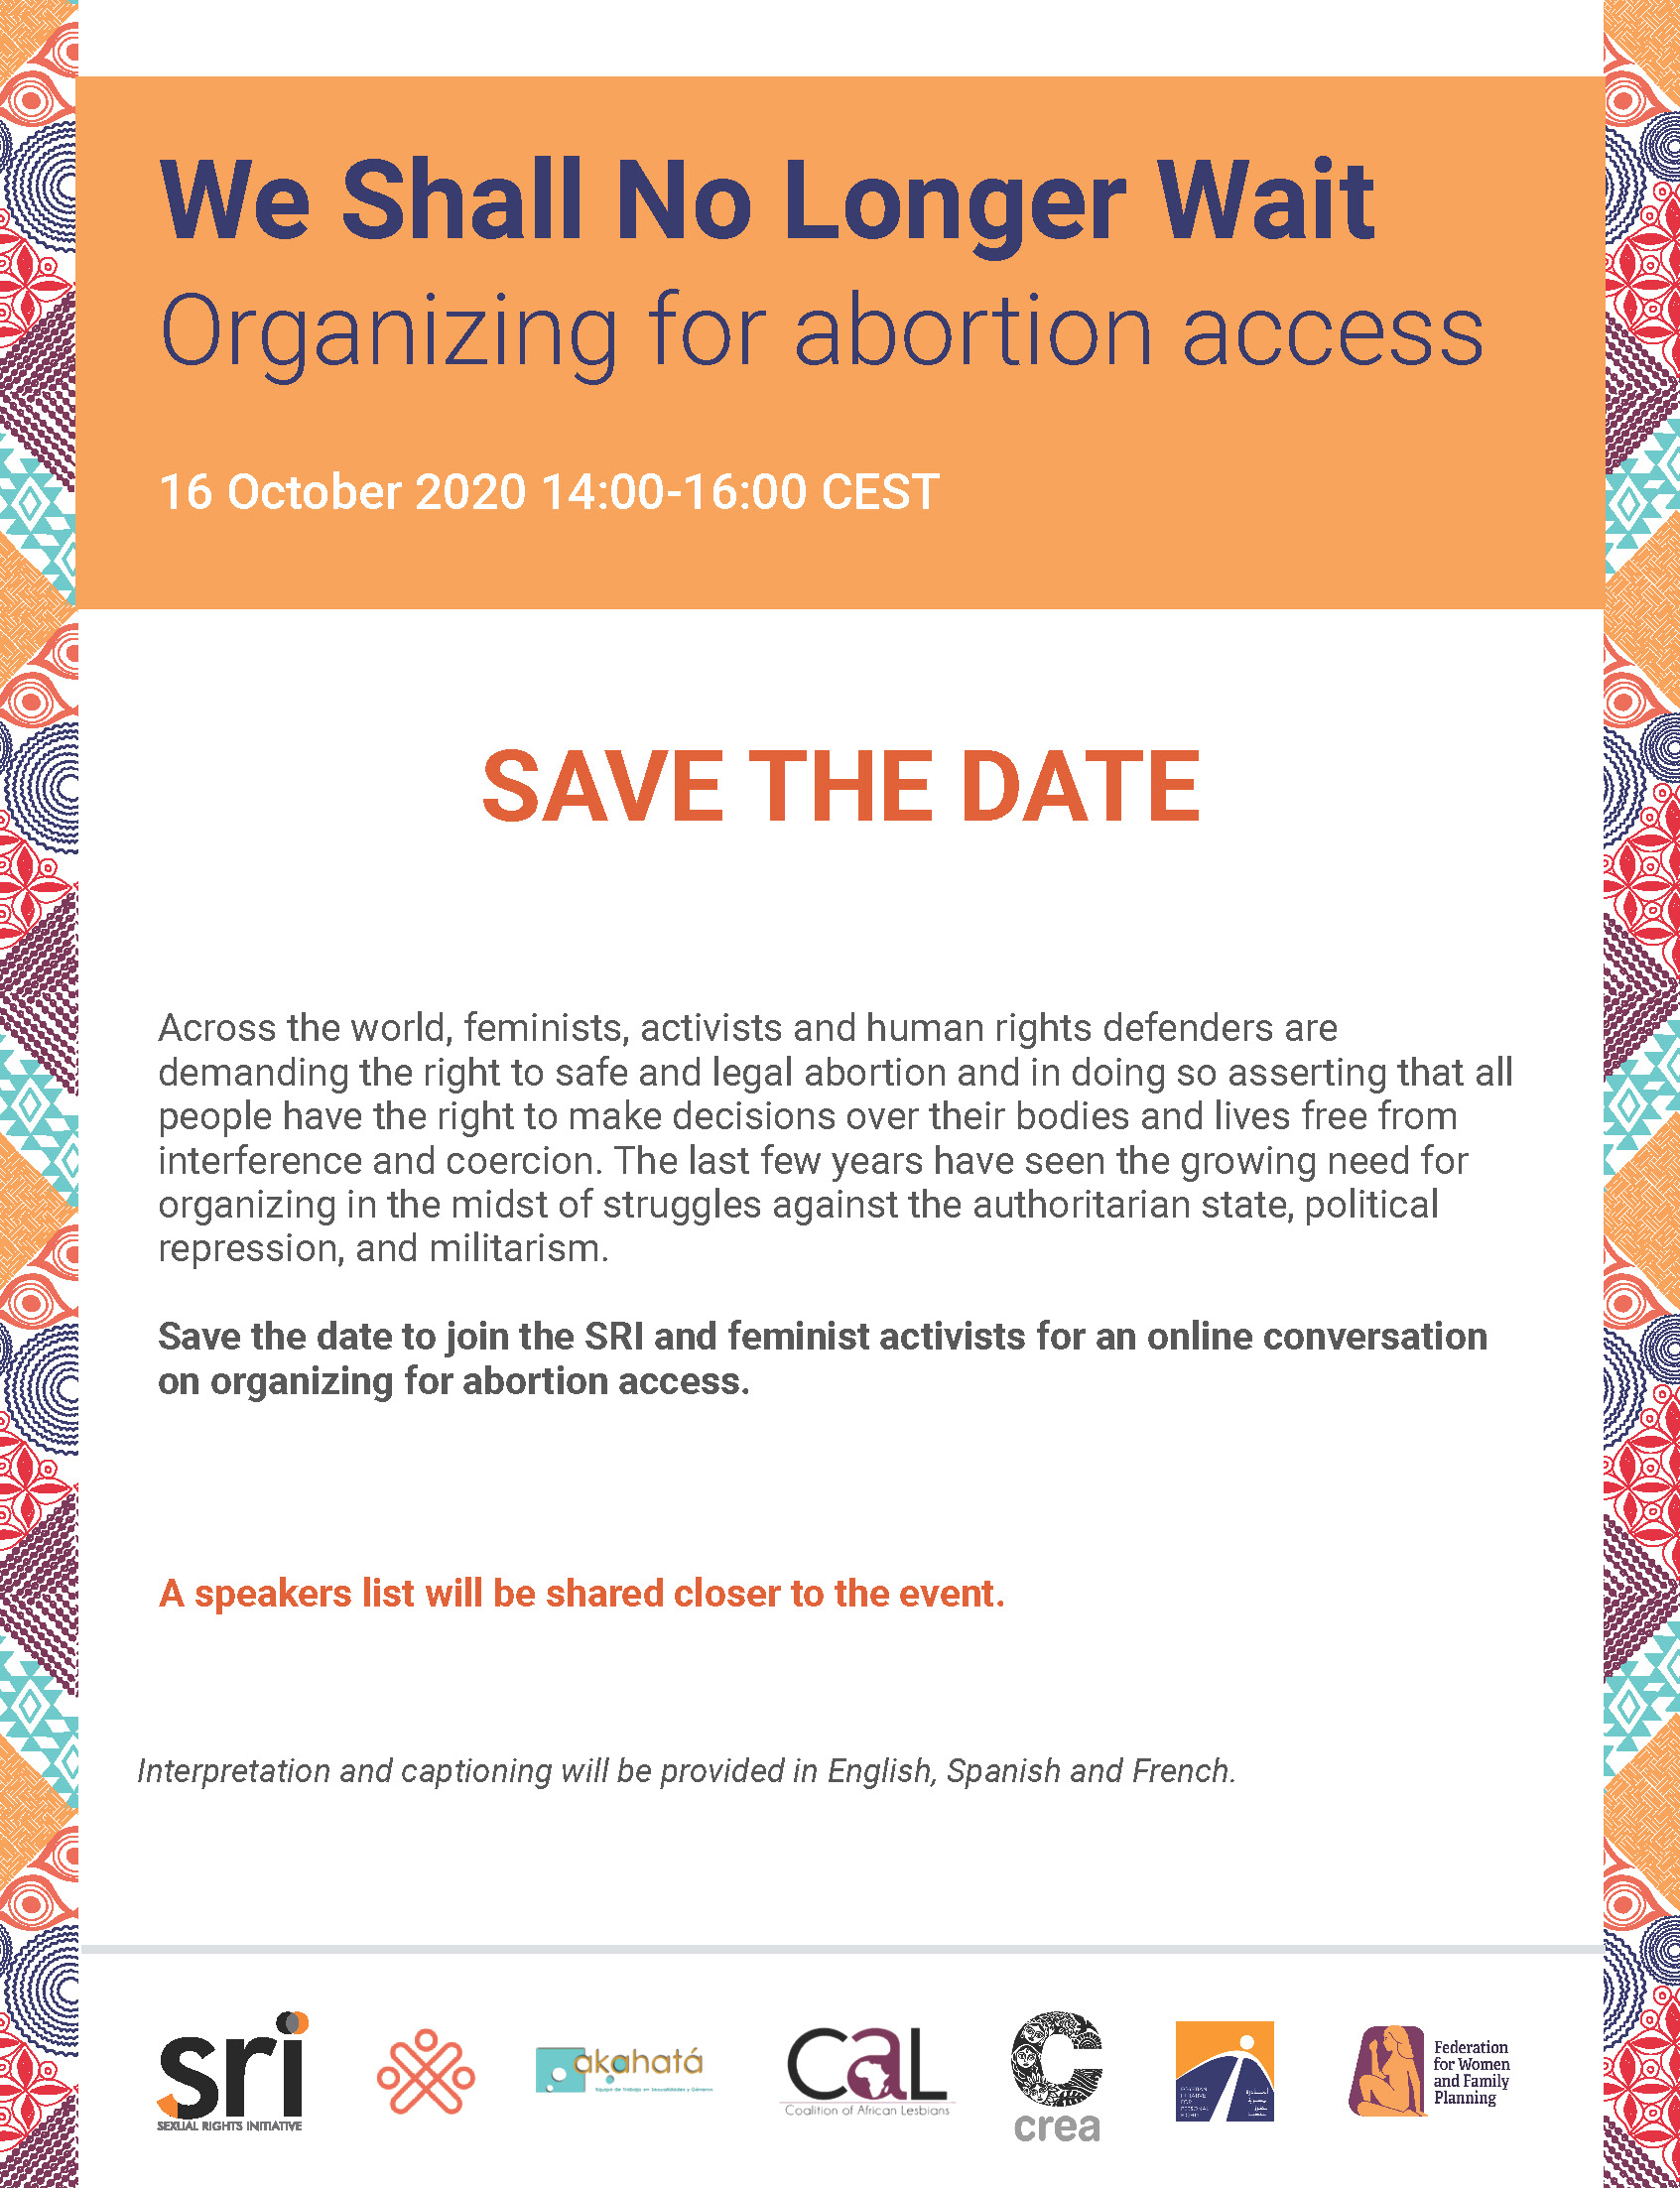 Save the Date for event: organizing for abortion access Oct 16 2020 2 pm CEST